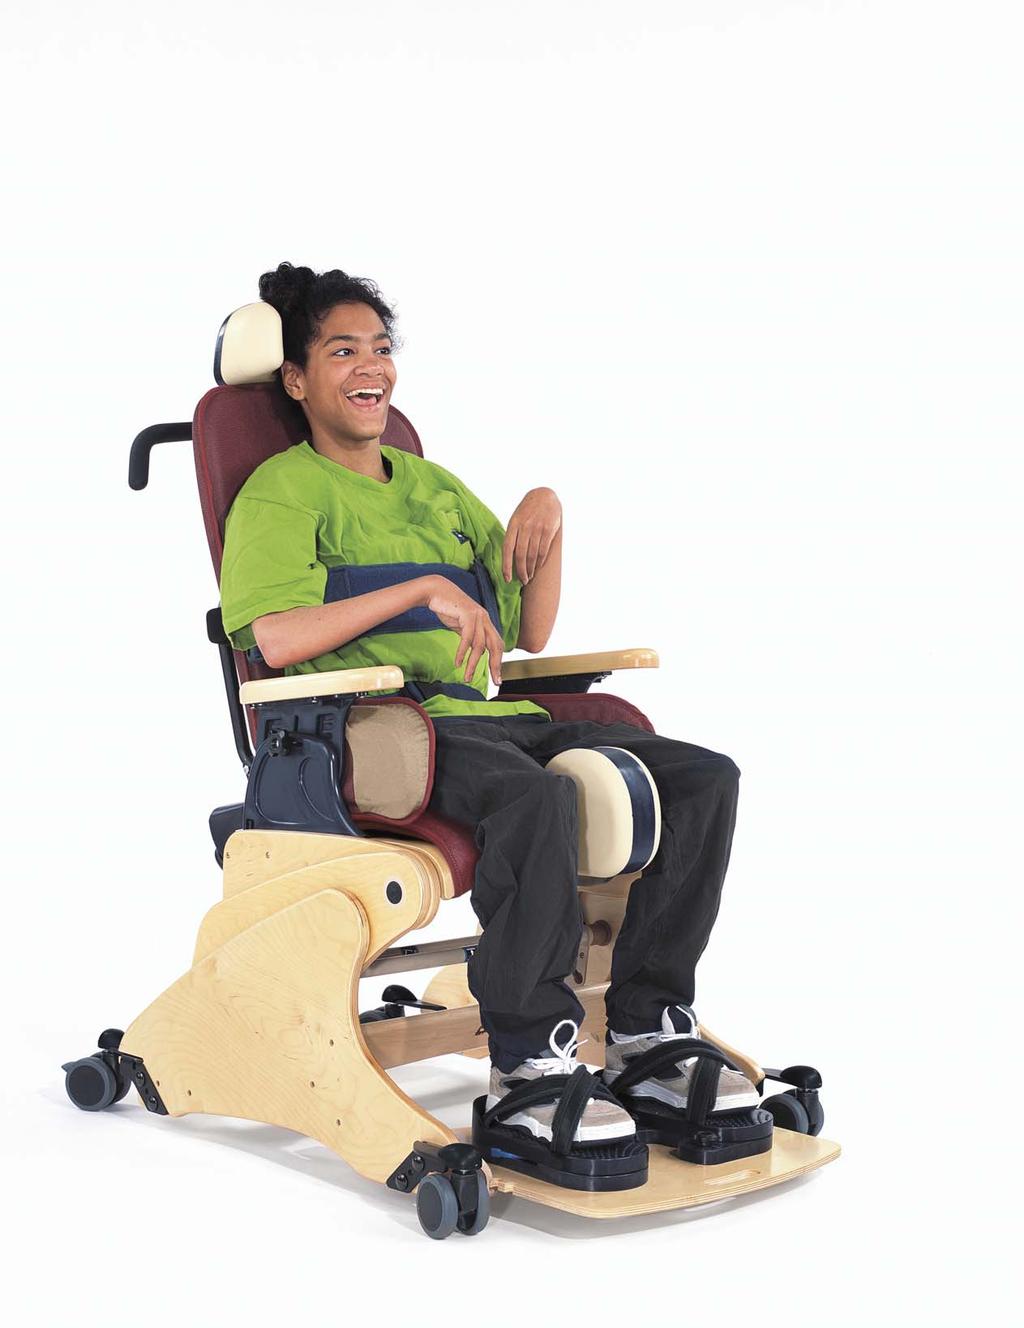 Andrea is using a Large High Back Mobile Chair with Additional Side Pads.